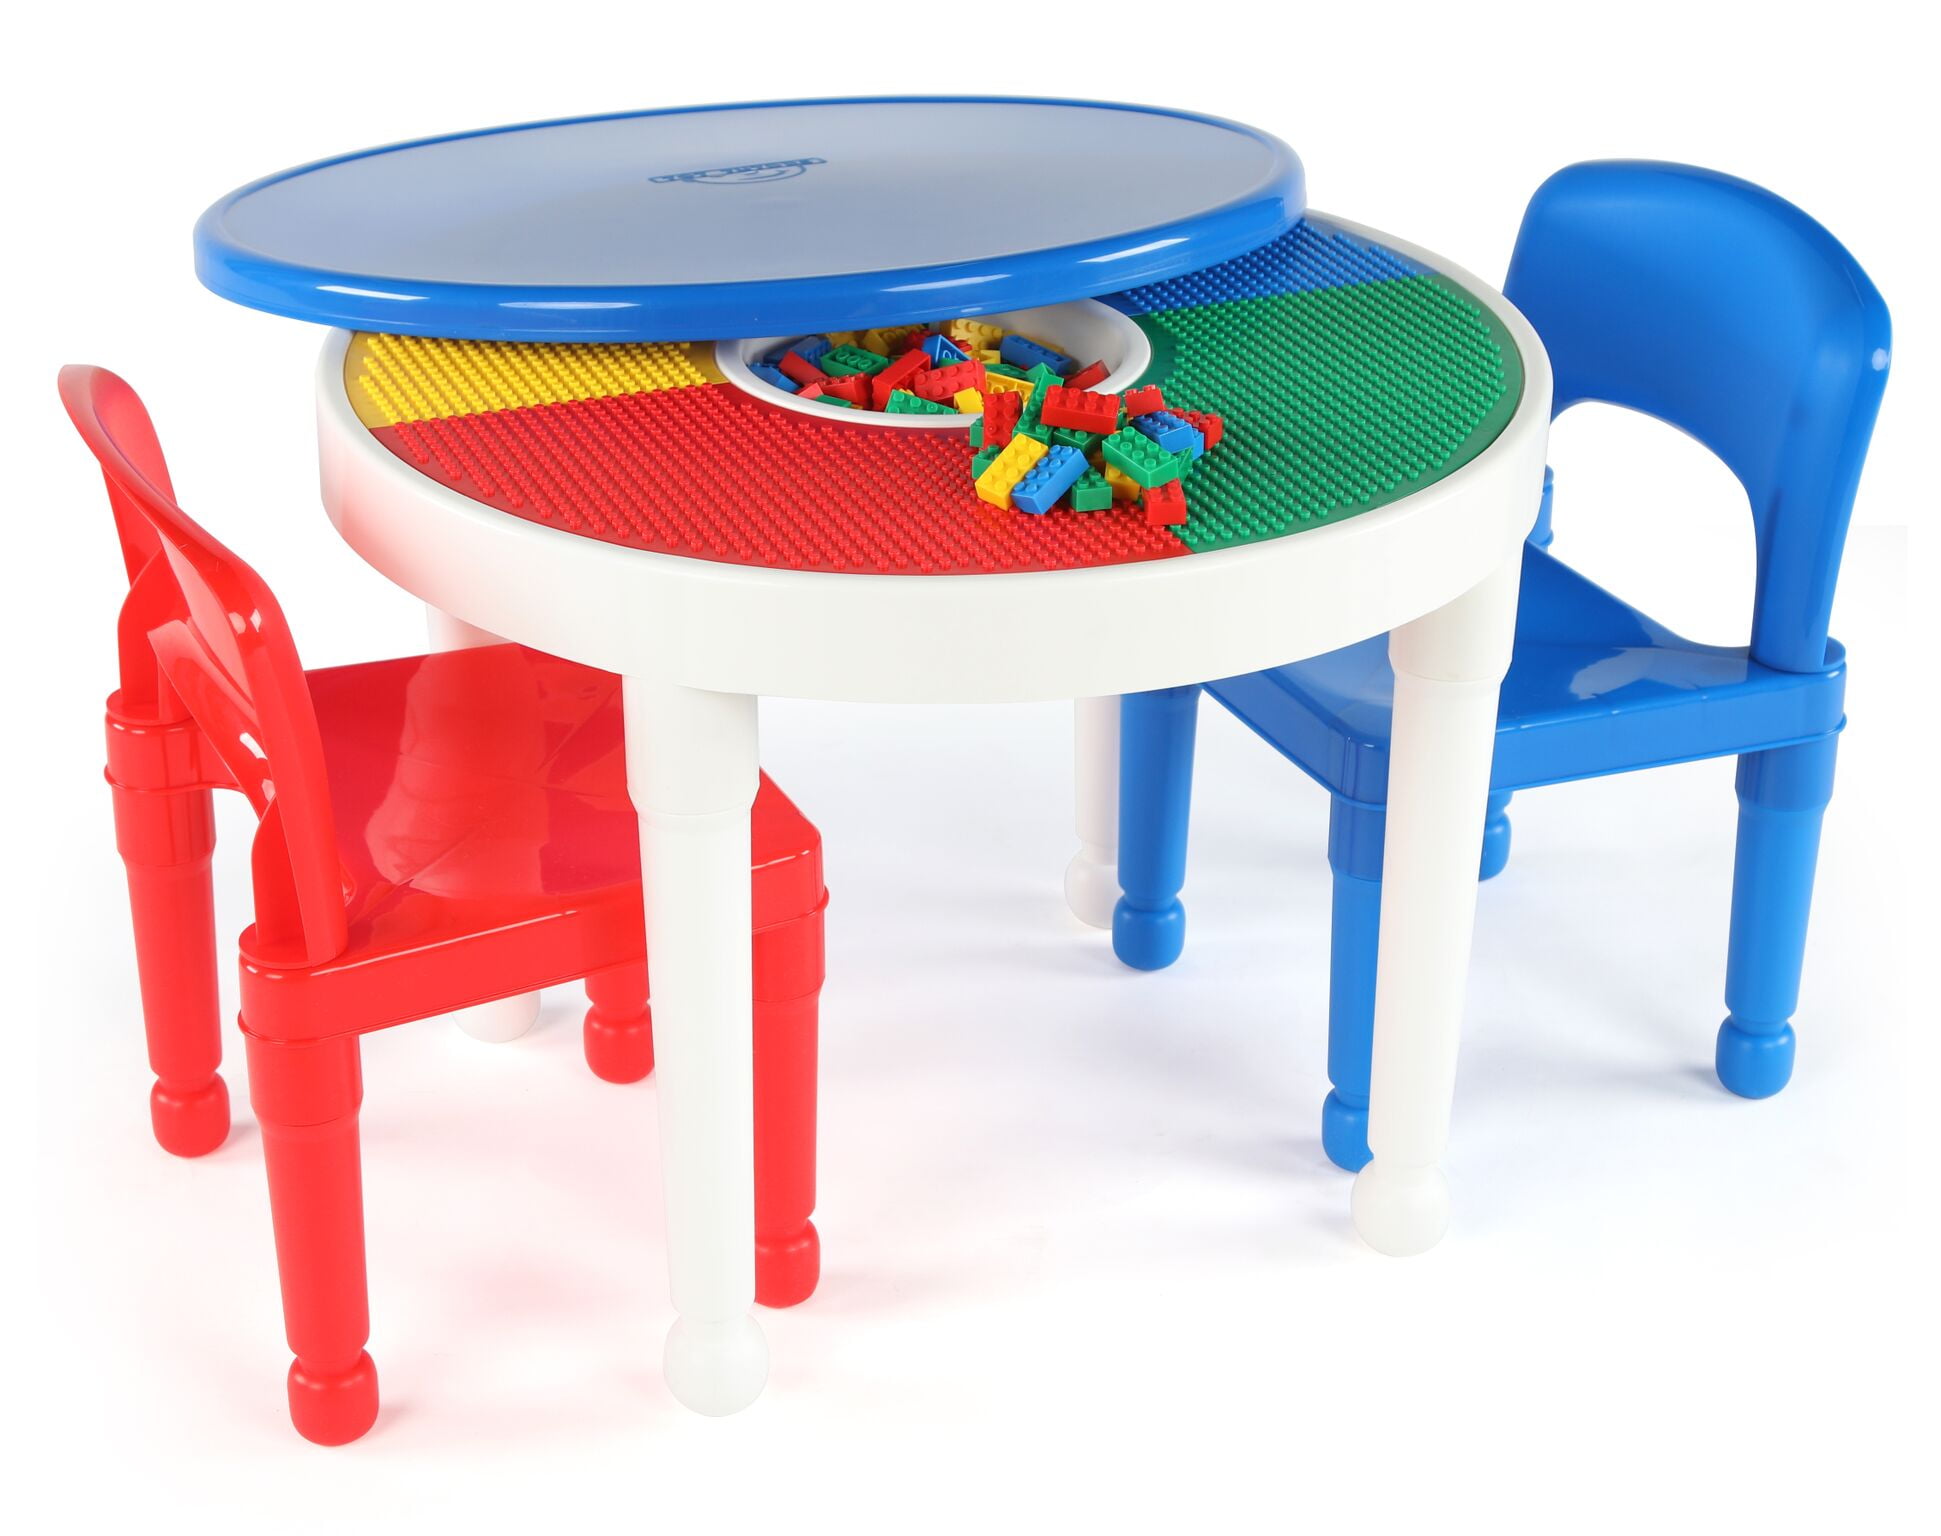 Plastic Activity Table And 2 Chairs Set, Lego Table With 2 Chairs